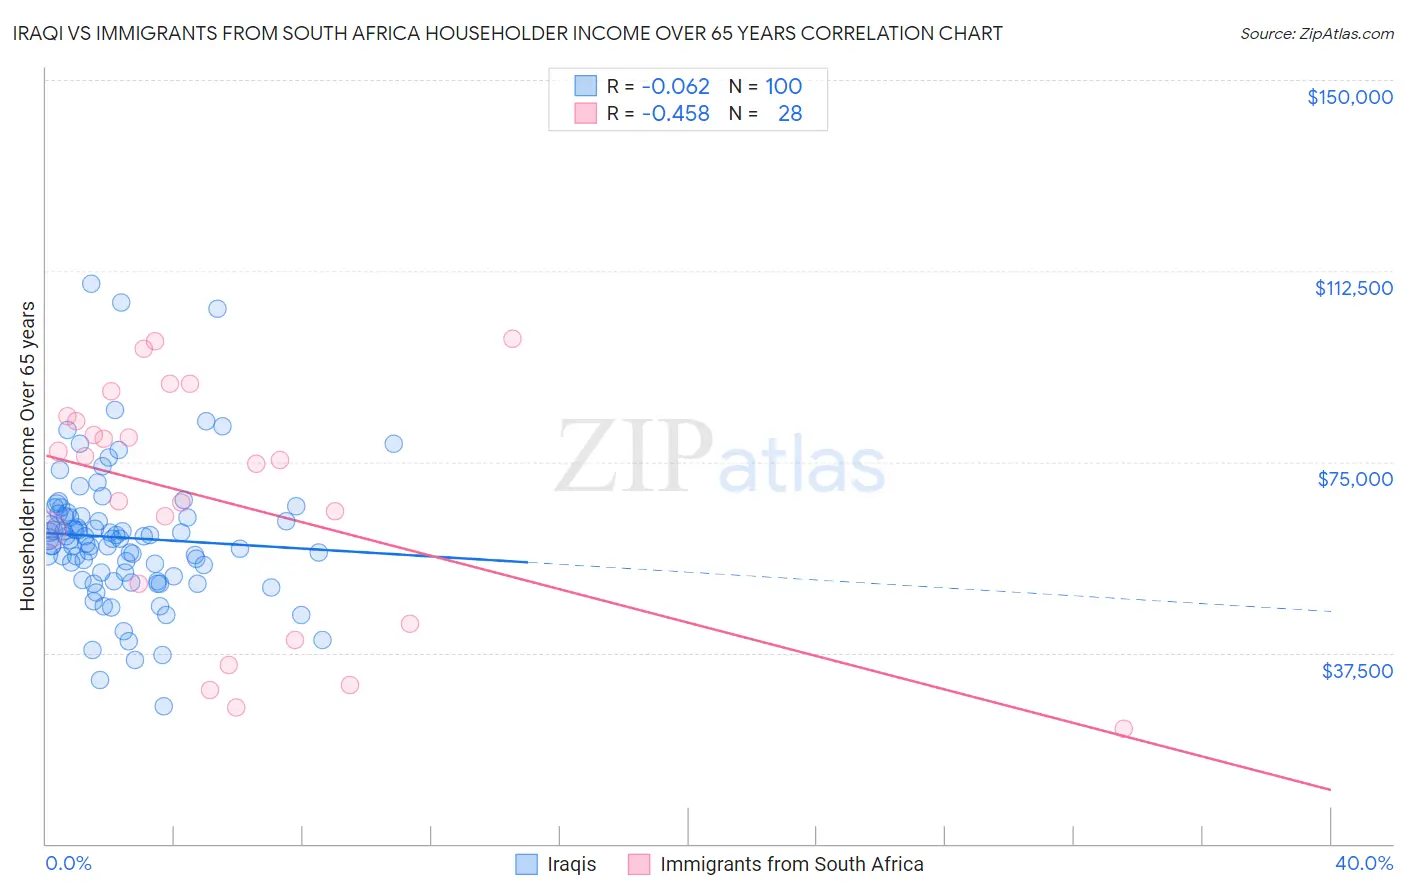 Iraqi vs Immigrants from South Africa Householder Income Over 65 years